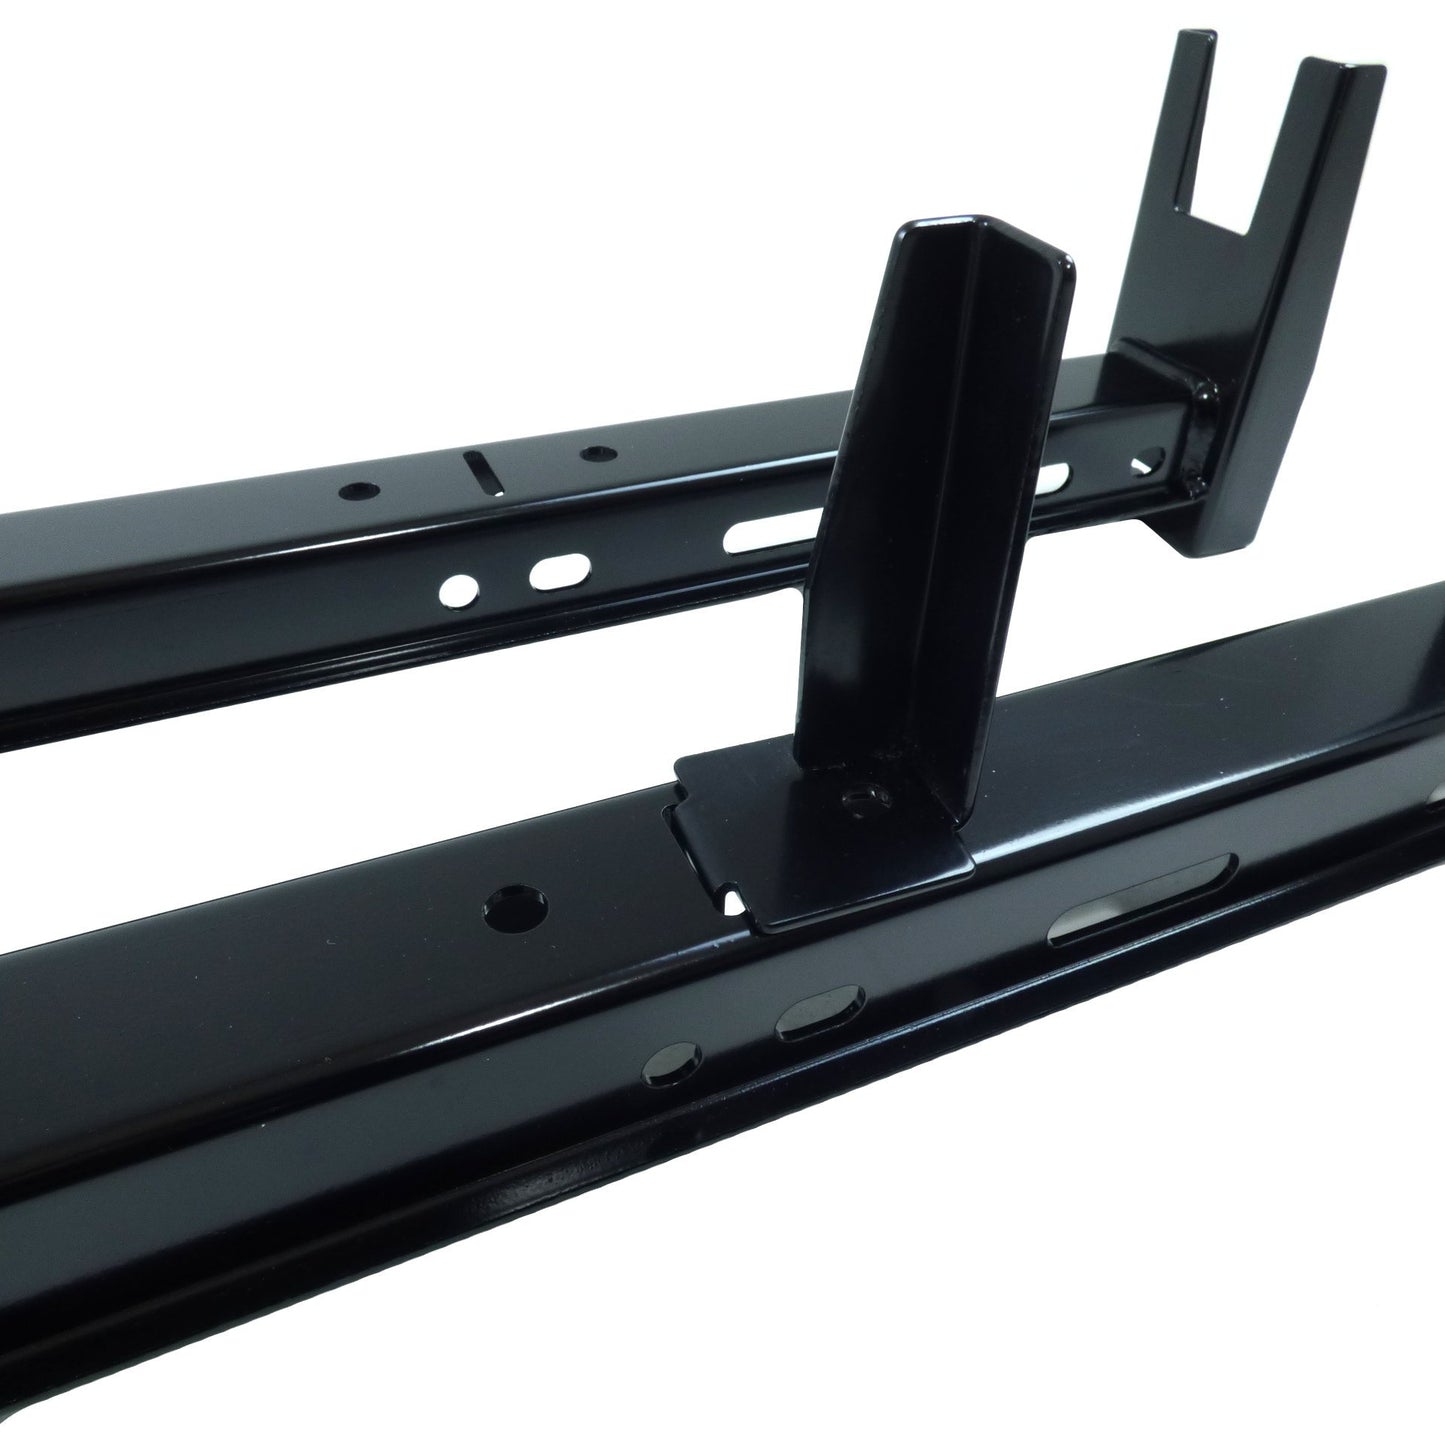 Black 2 Bar Van Roof Ladder Rack Cross Bars for Ford Transit Connect 2013-2019 -  - sold by Direct4x4